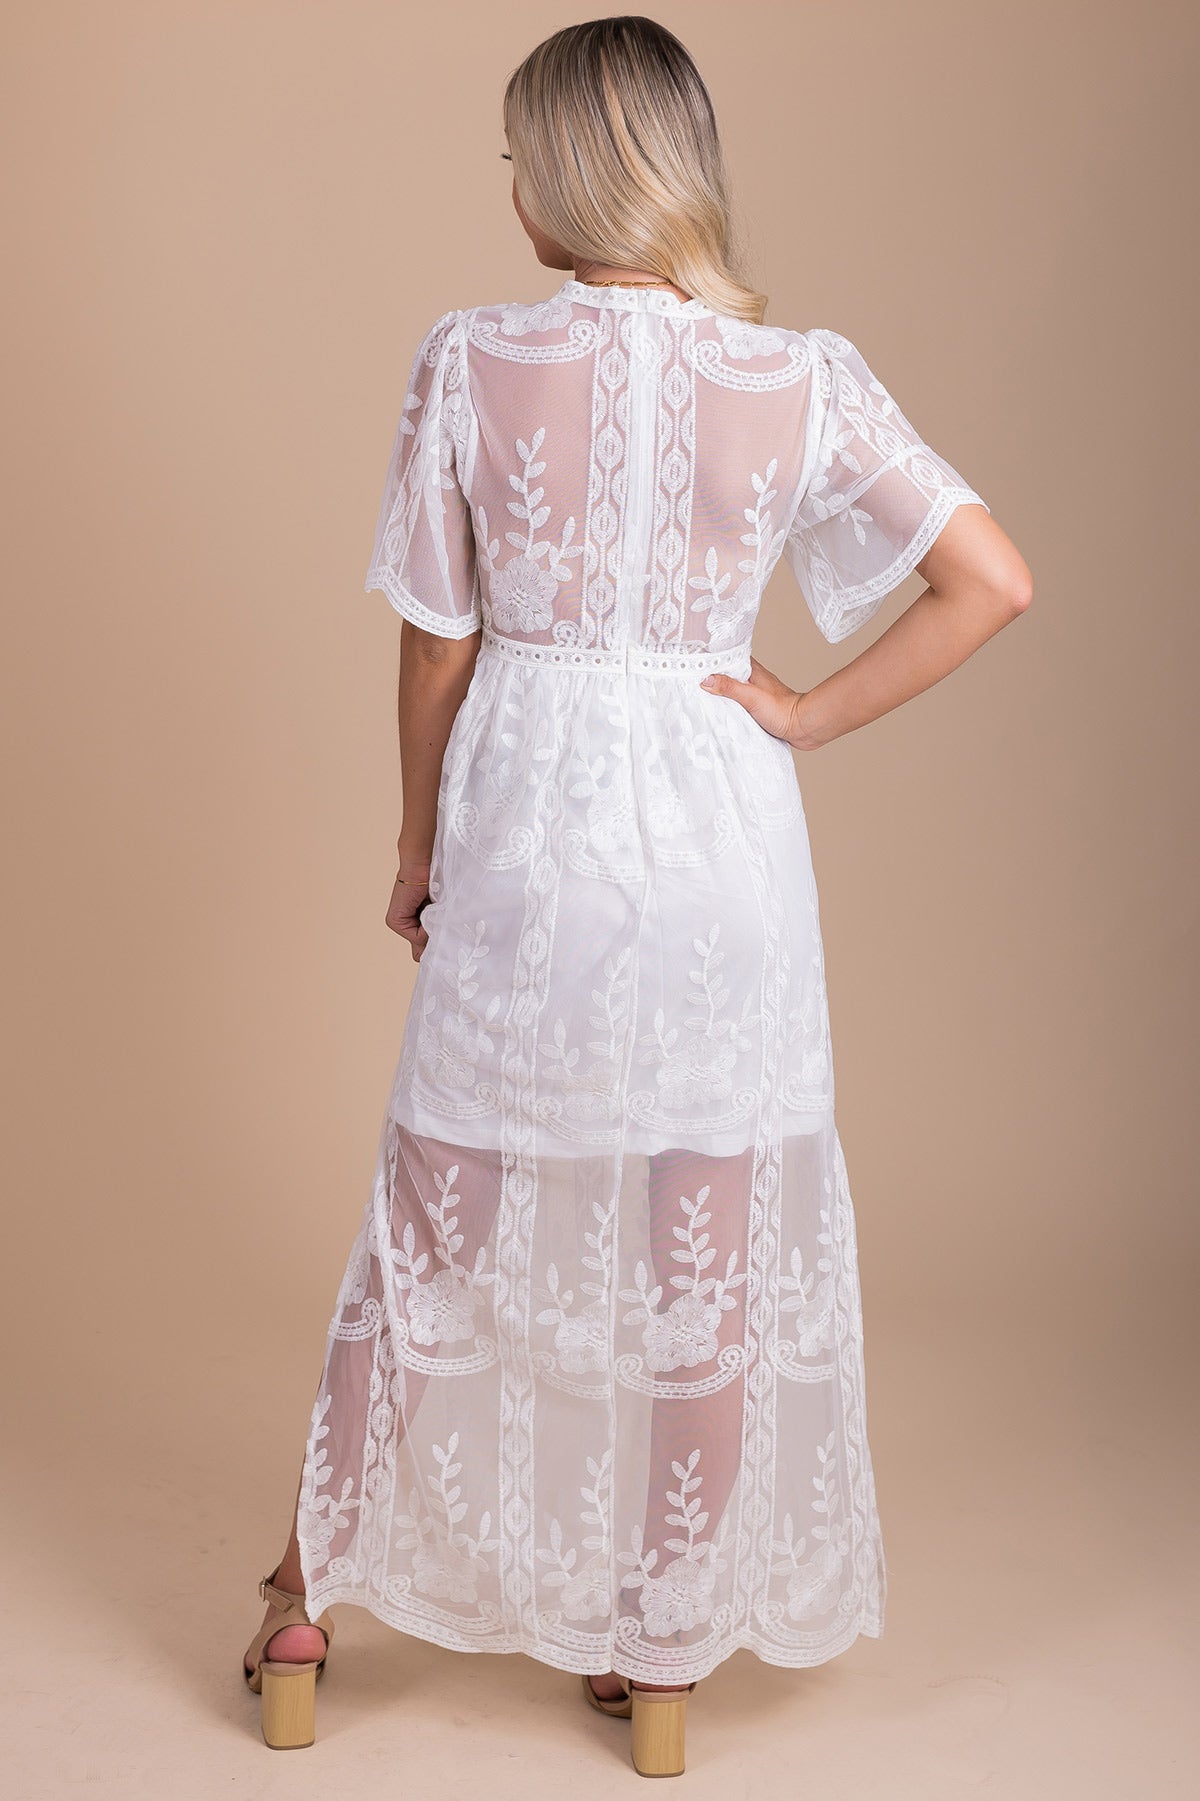 Maxi Length Lace Dress in White for Women